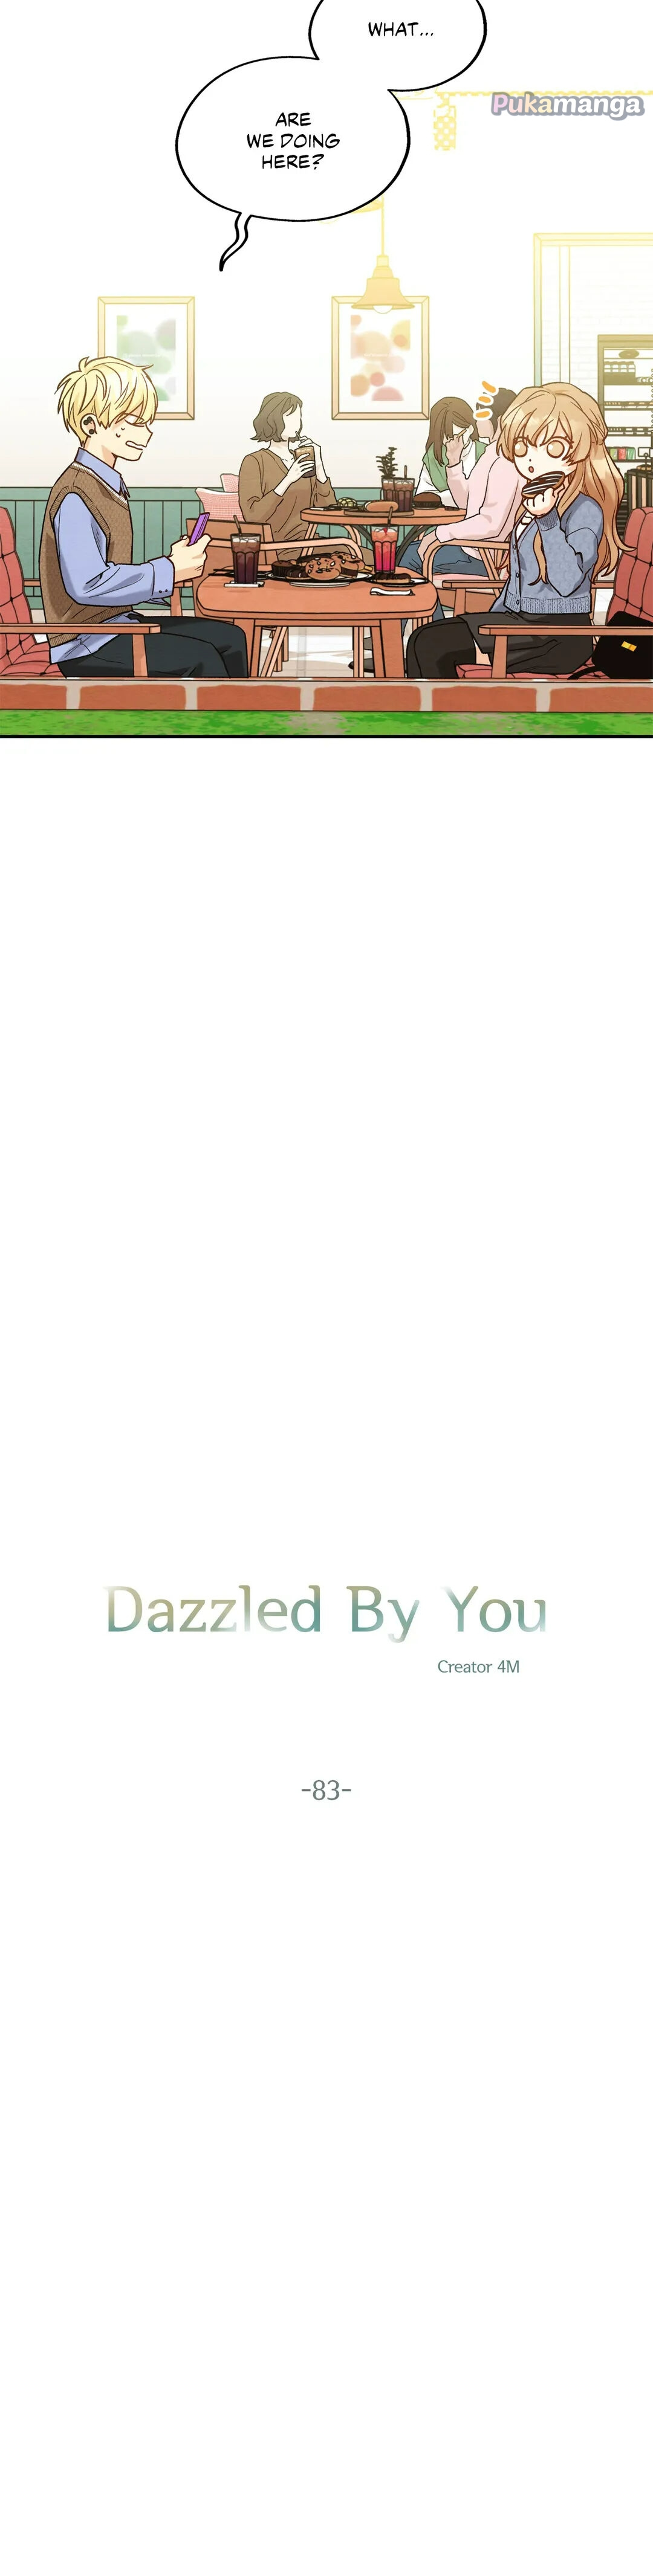 Dazzled By You - Page 3